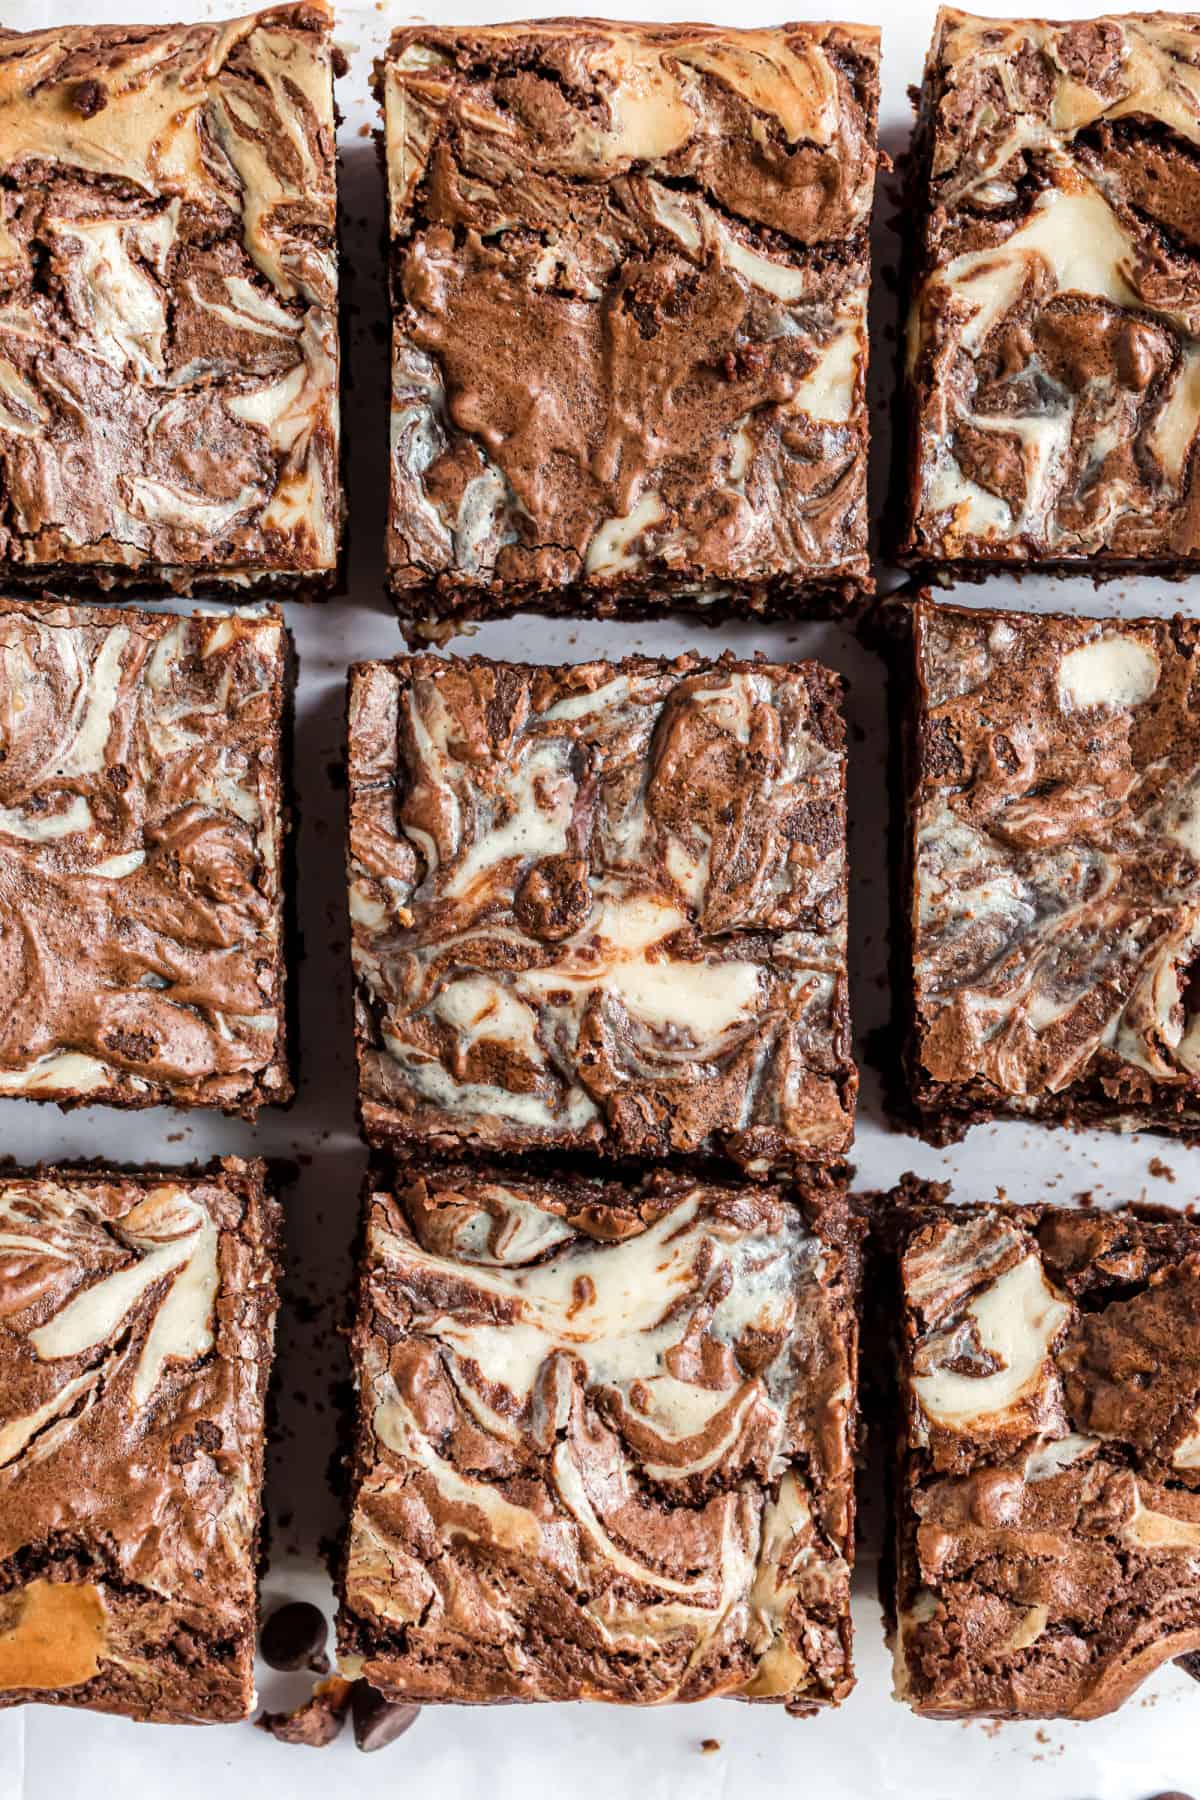 Cream cheese swirled brownies cut into squares.